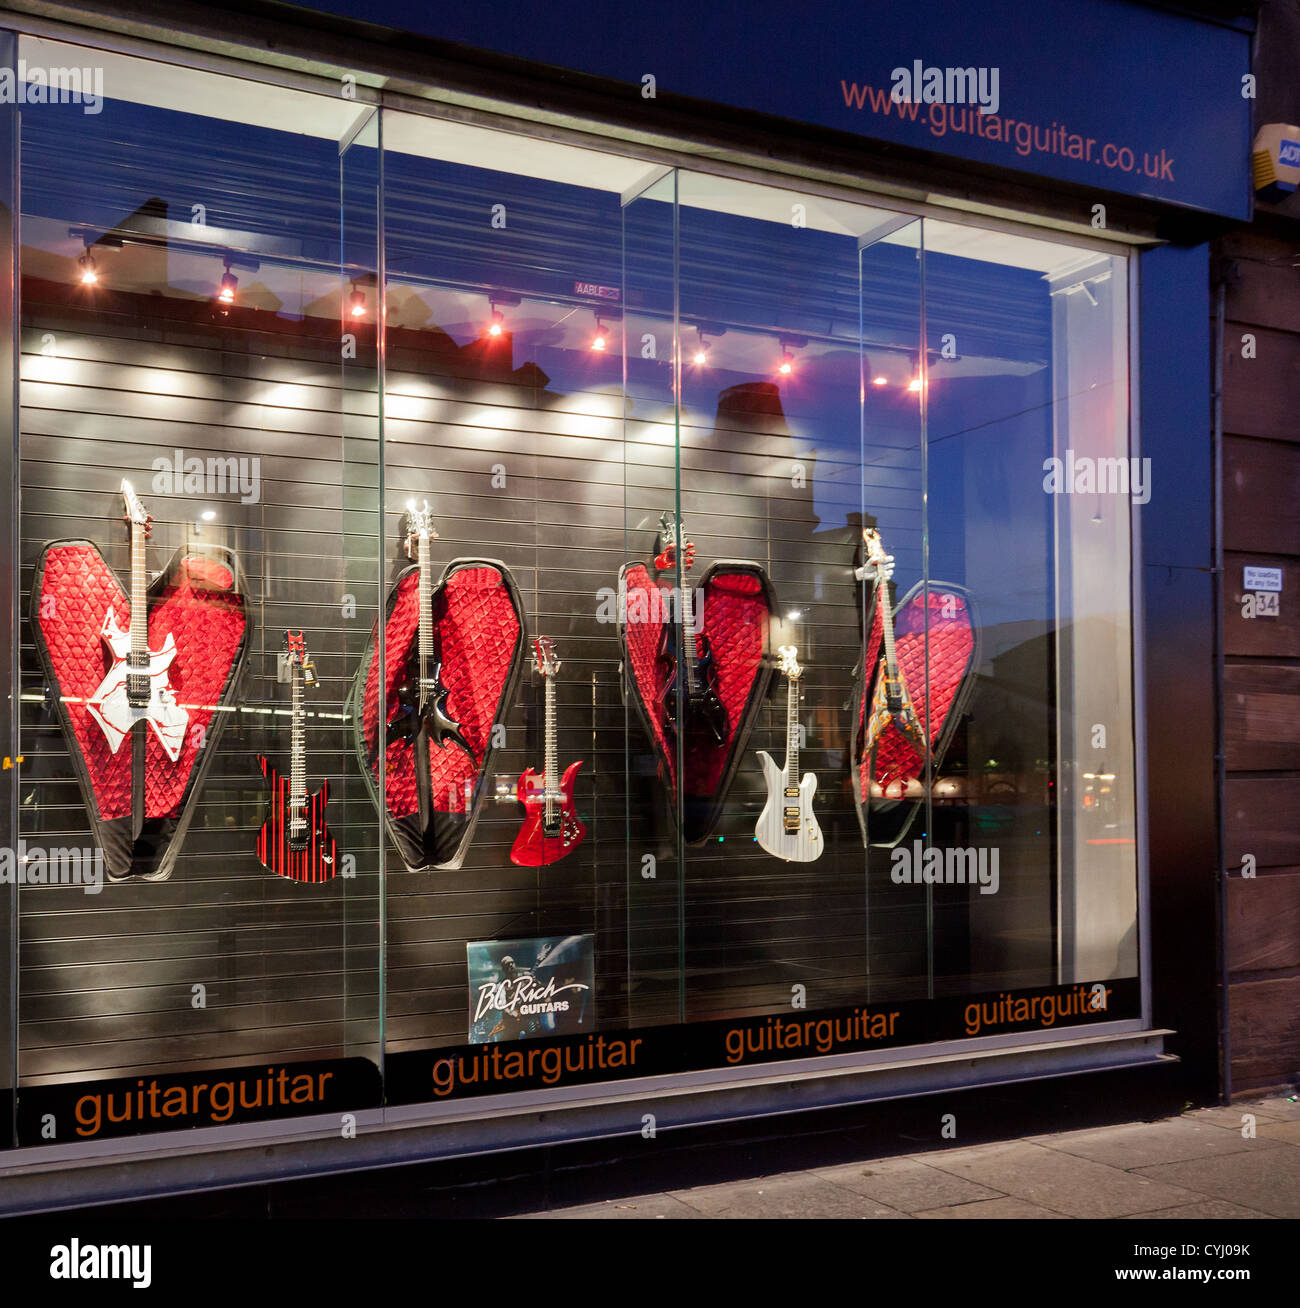 Window display: GuitarGuitar, specialist guitar store in Glasgow, Scotland, selling guitars and guitar accessories Stock Photo